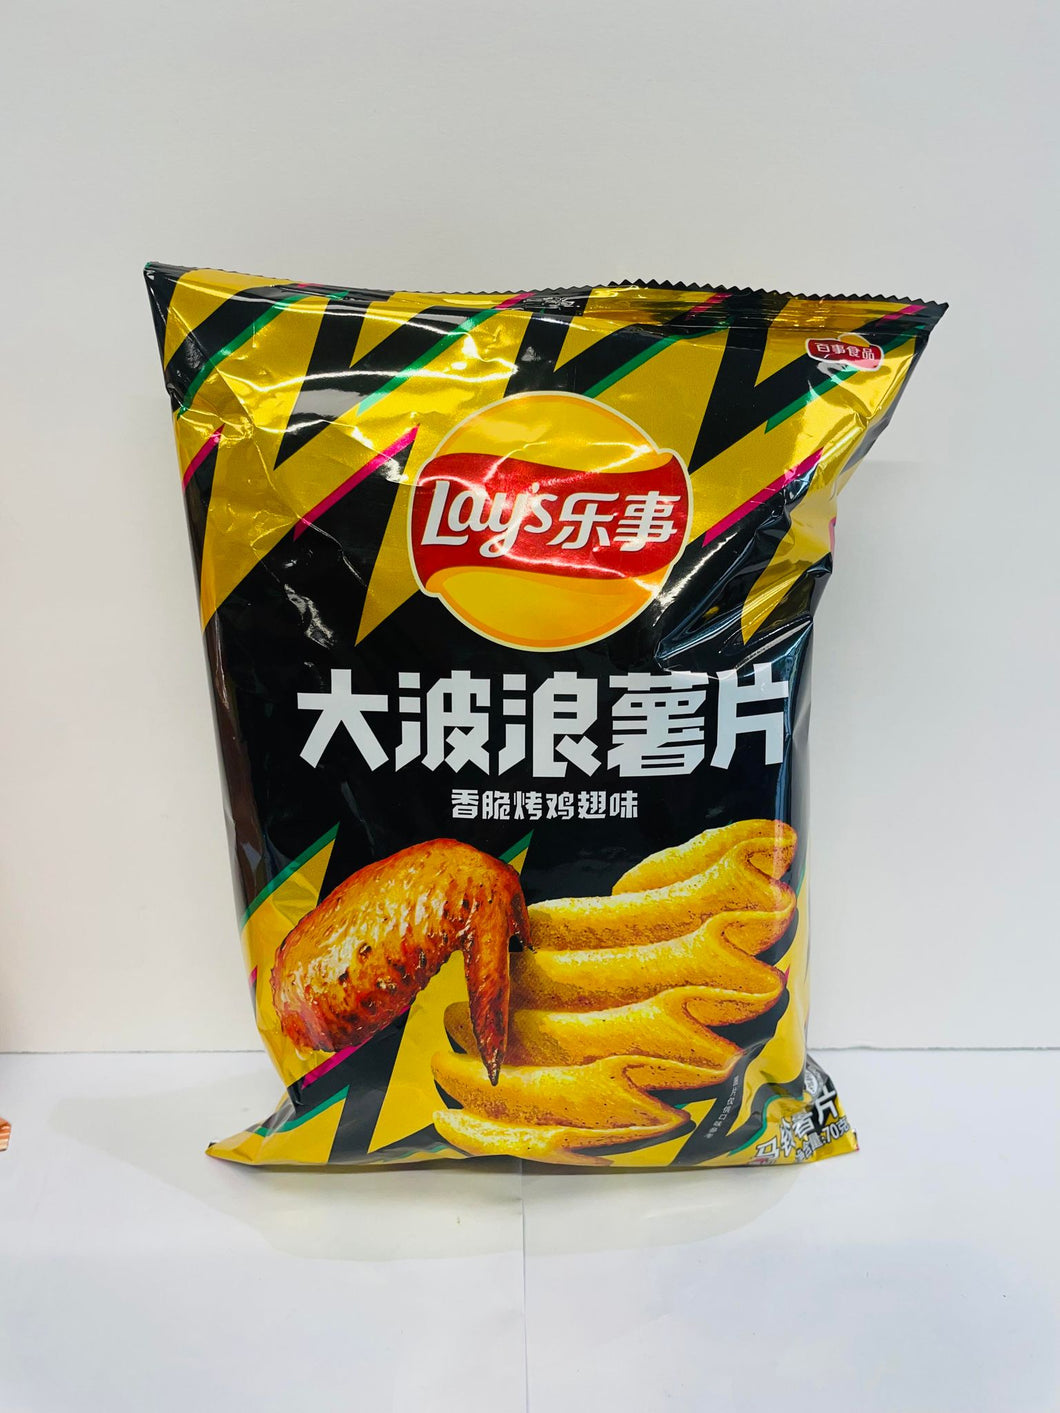 LAYS WAVY CHIPS ROASTED CHICKEN WINGS 70G